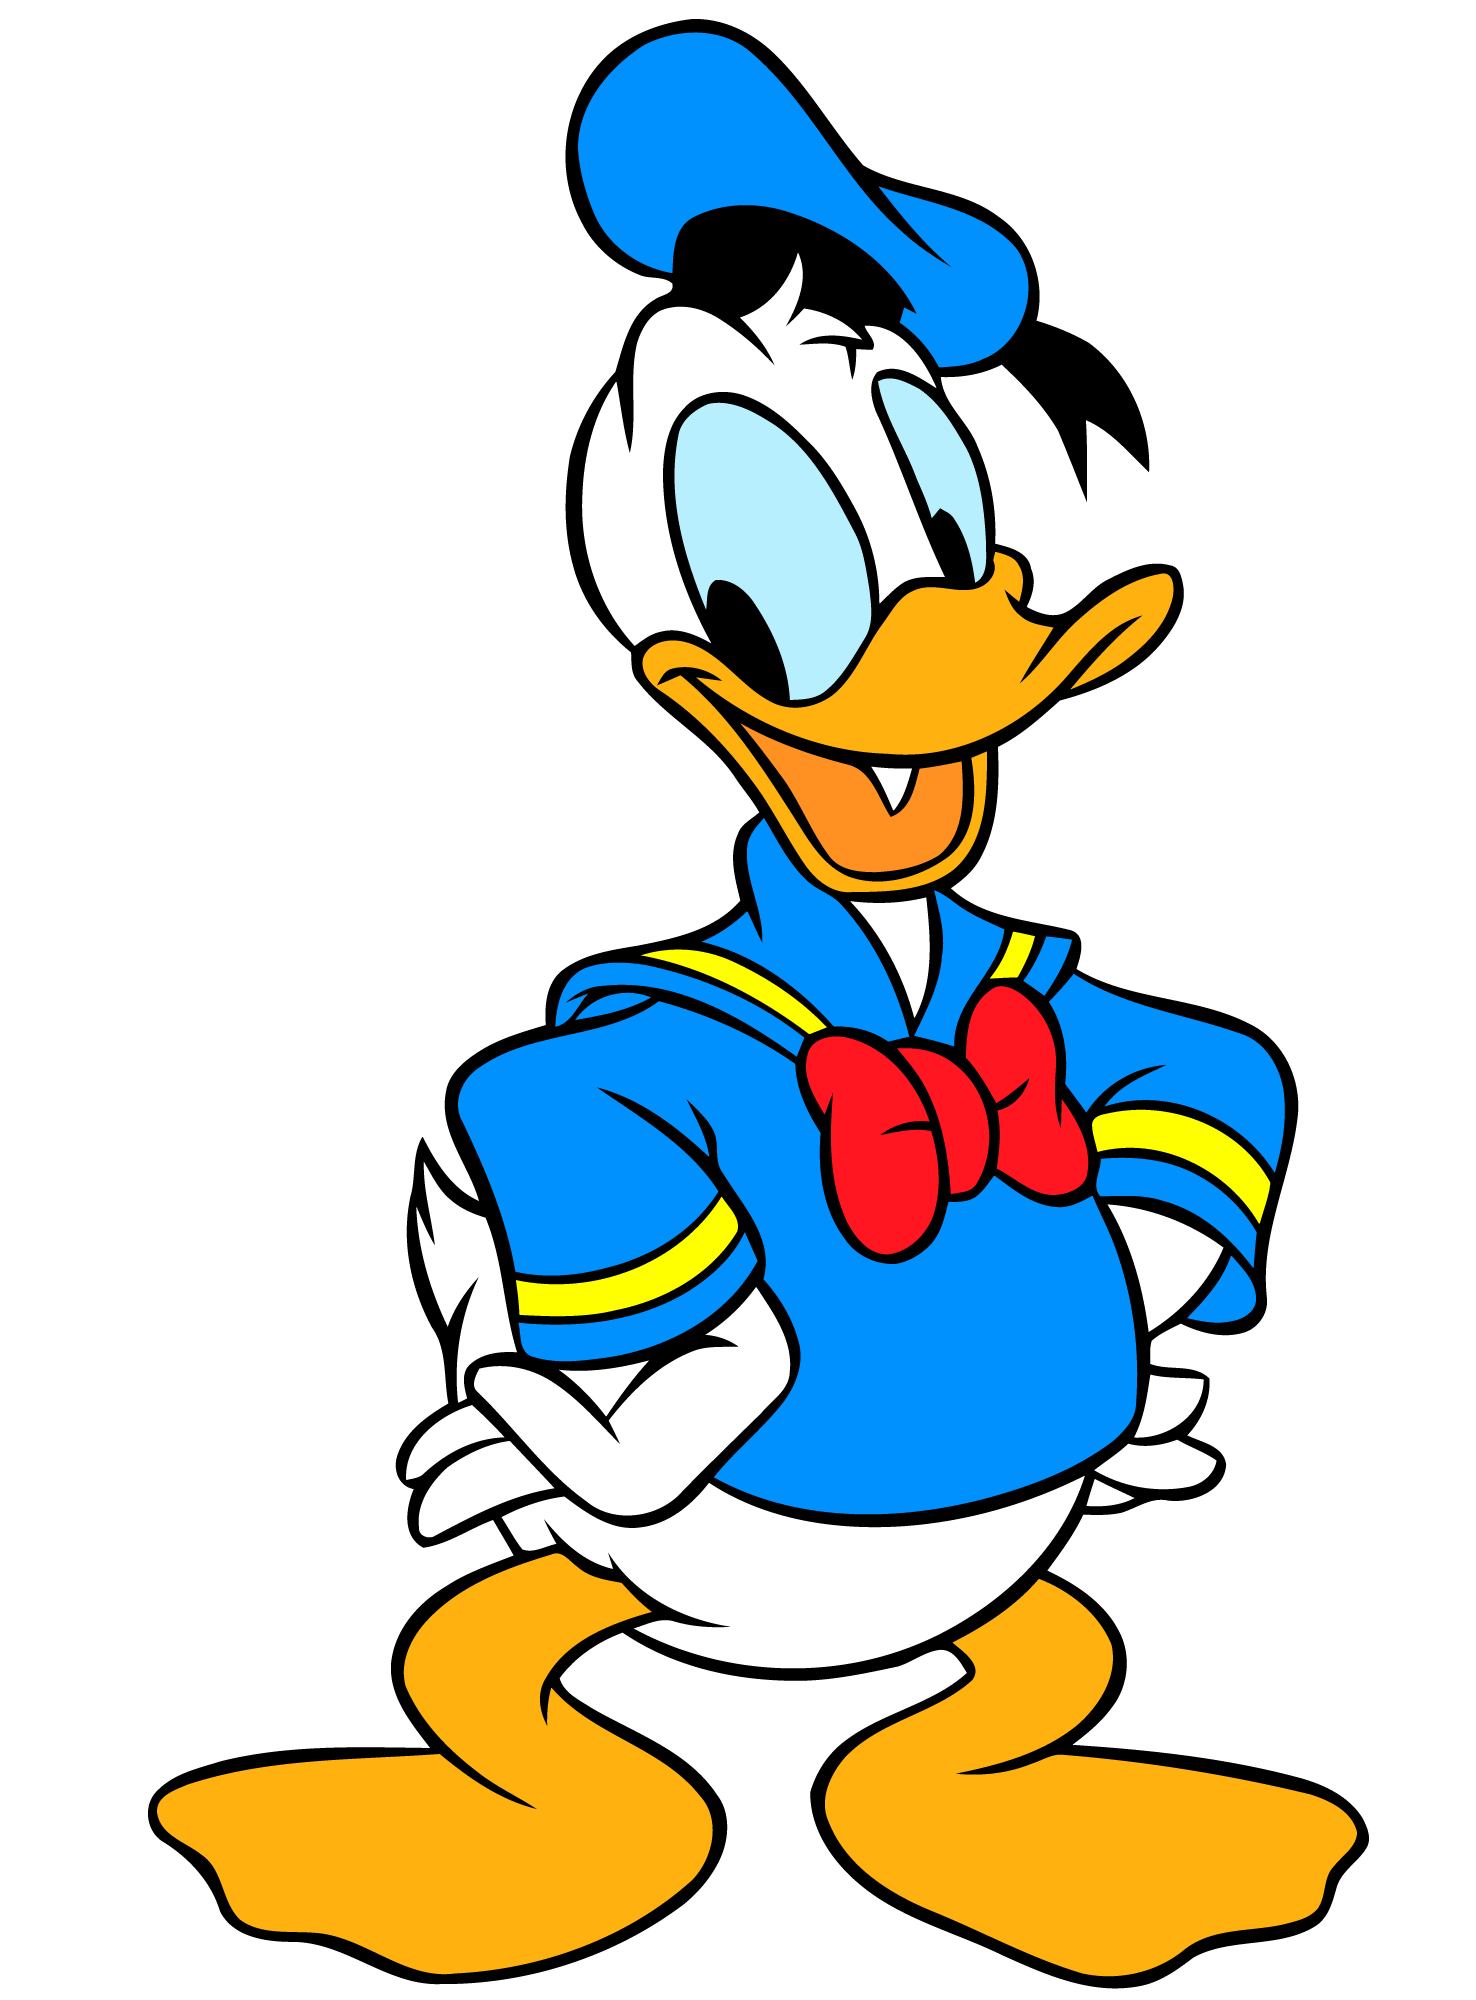 Knowledge clipart illustration. Donald duck hd wallpapers